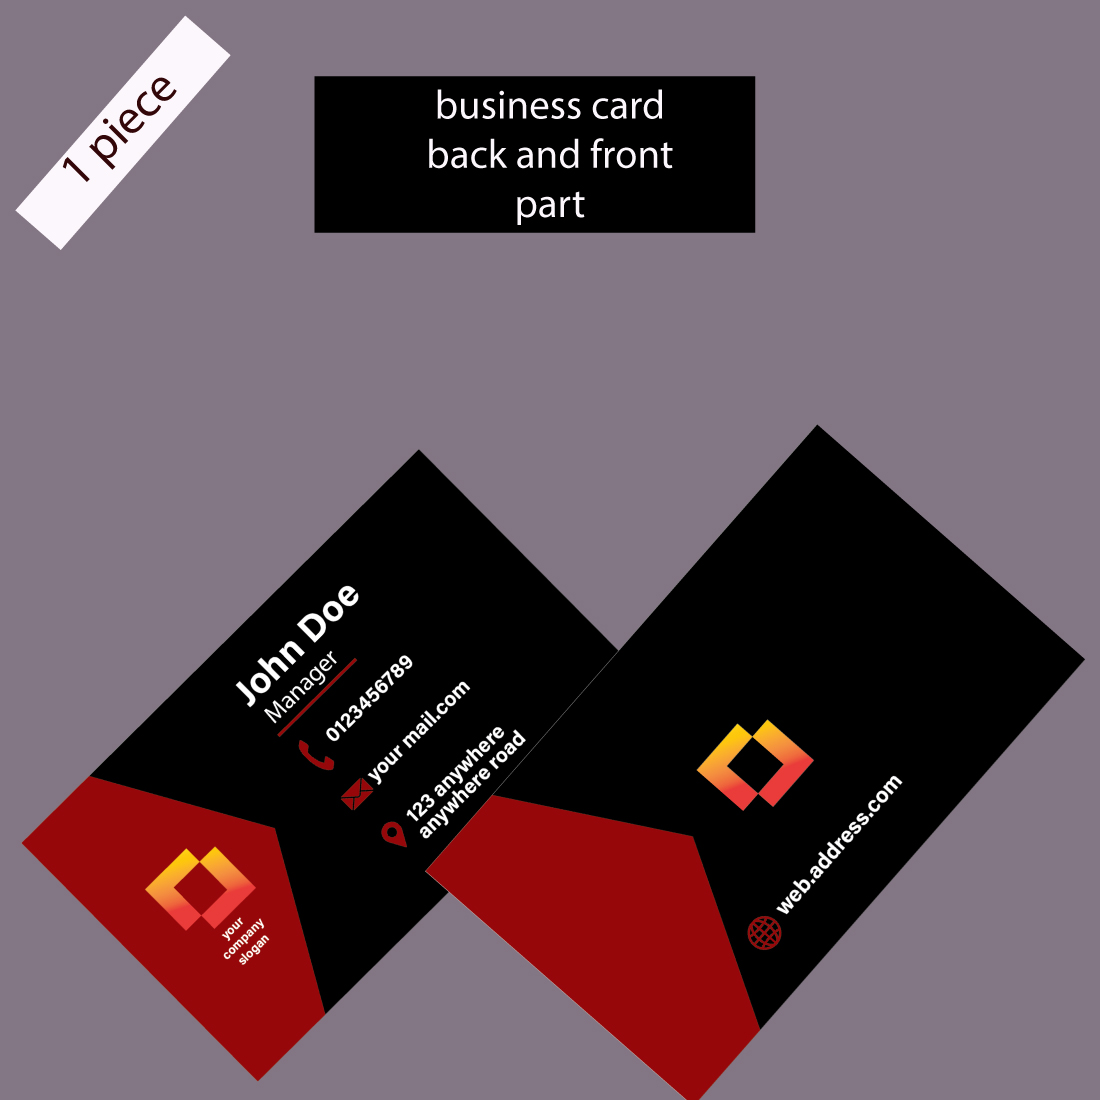 Business Card (editable) cover image.